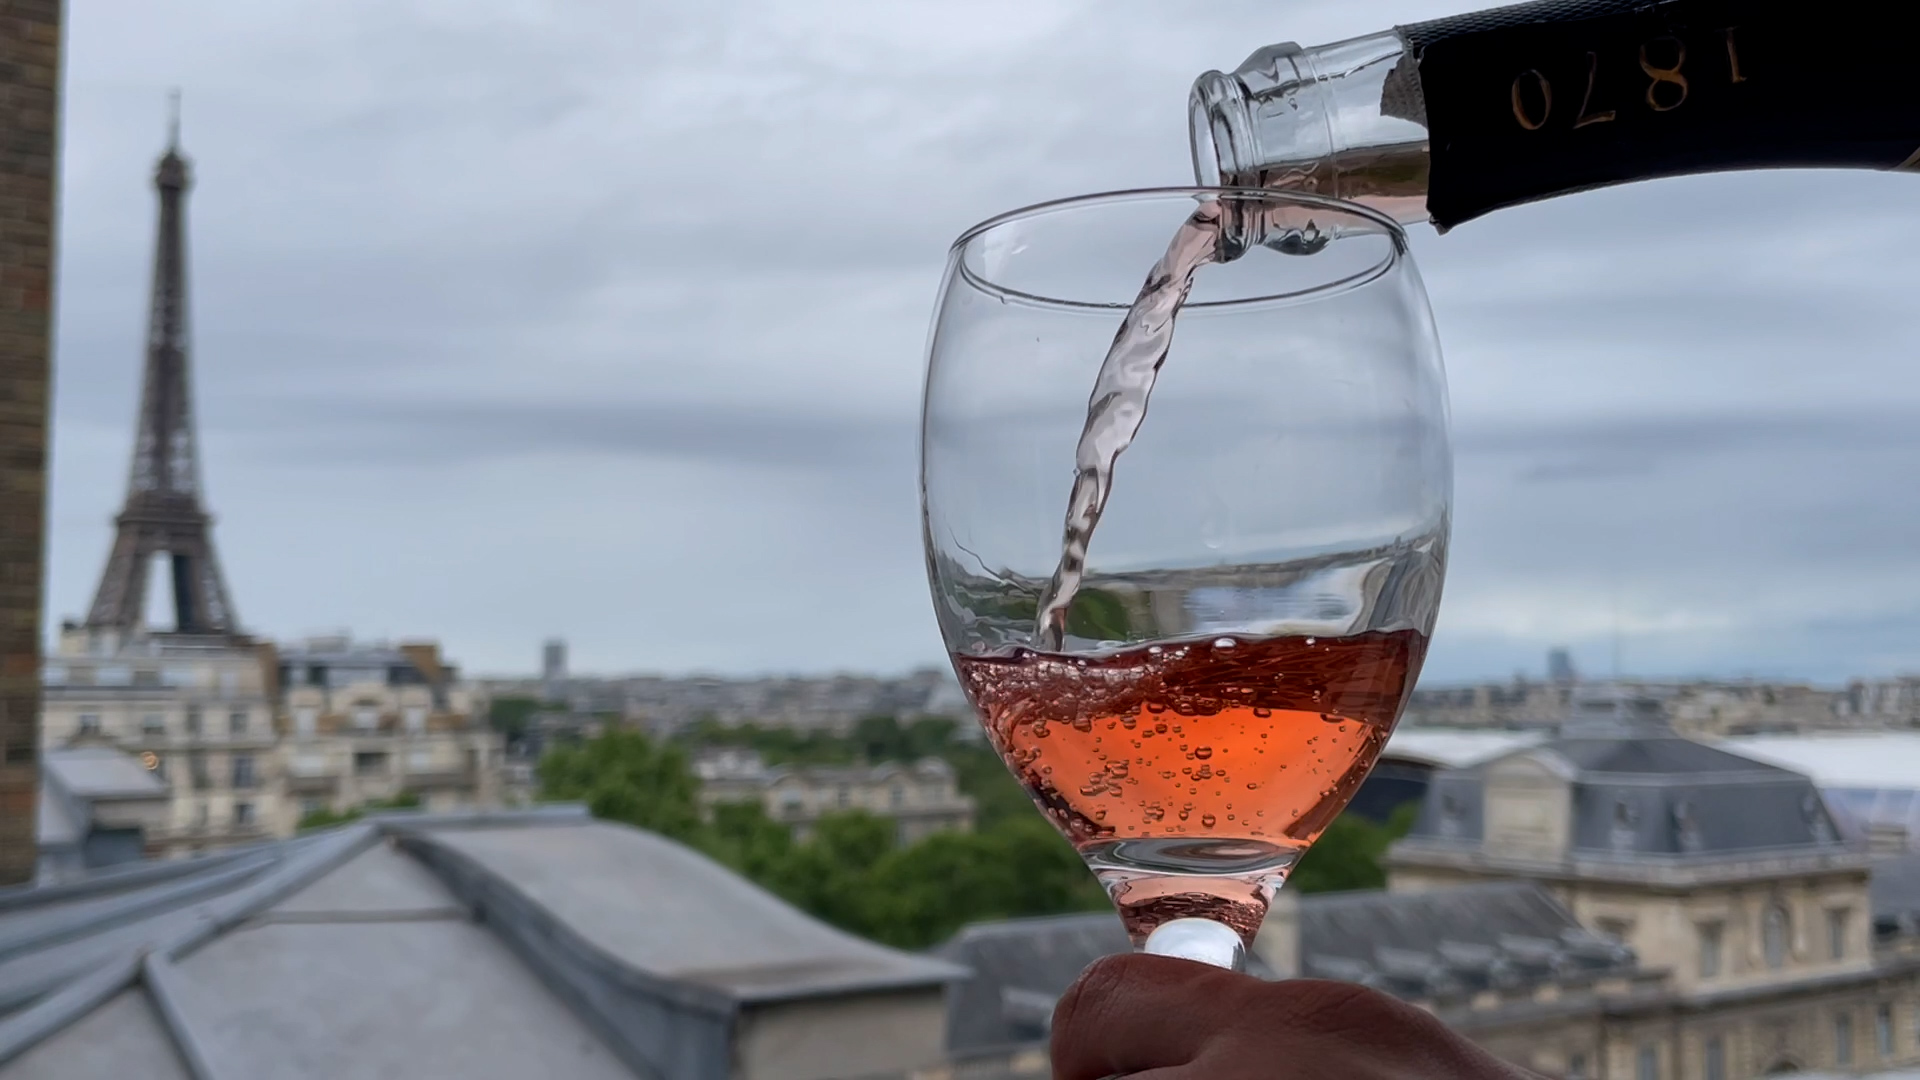 Figuière: Provence is the 'Champagne region' for rosé & reaction